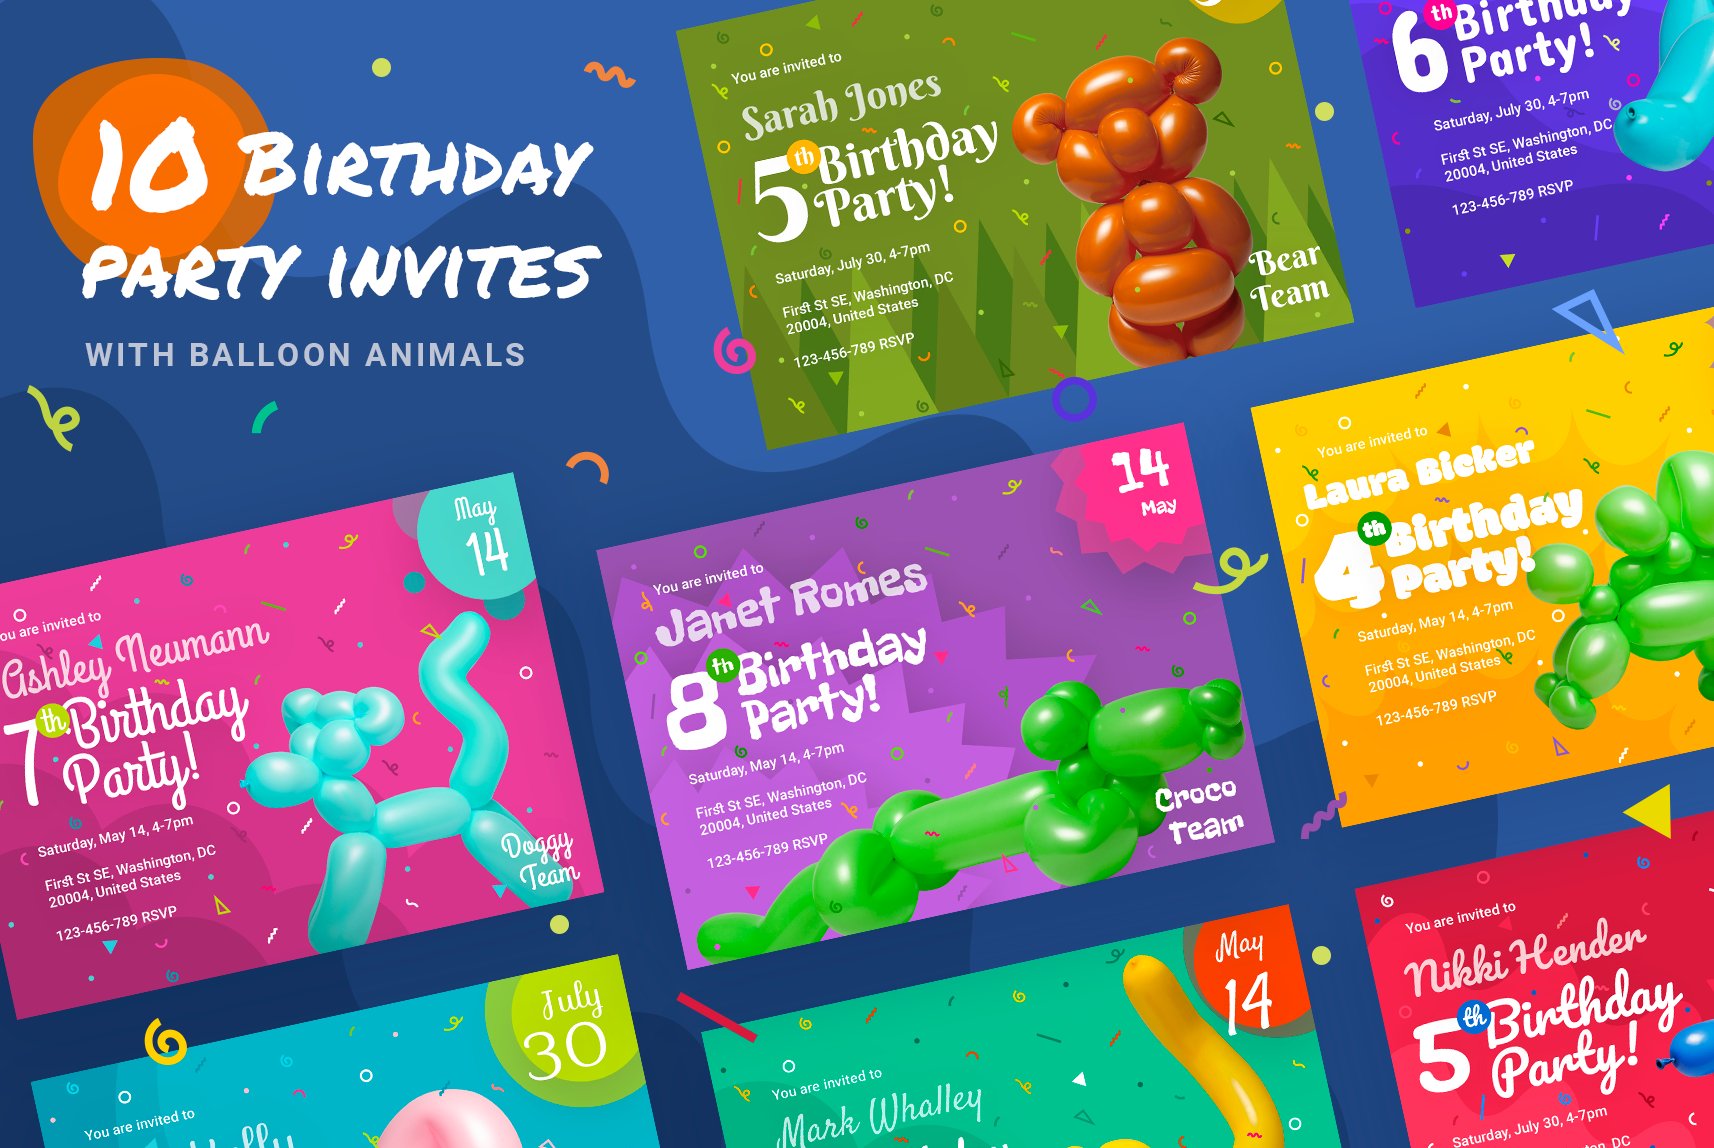 Birthday invites with Baloon animals cover image.